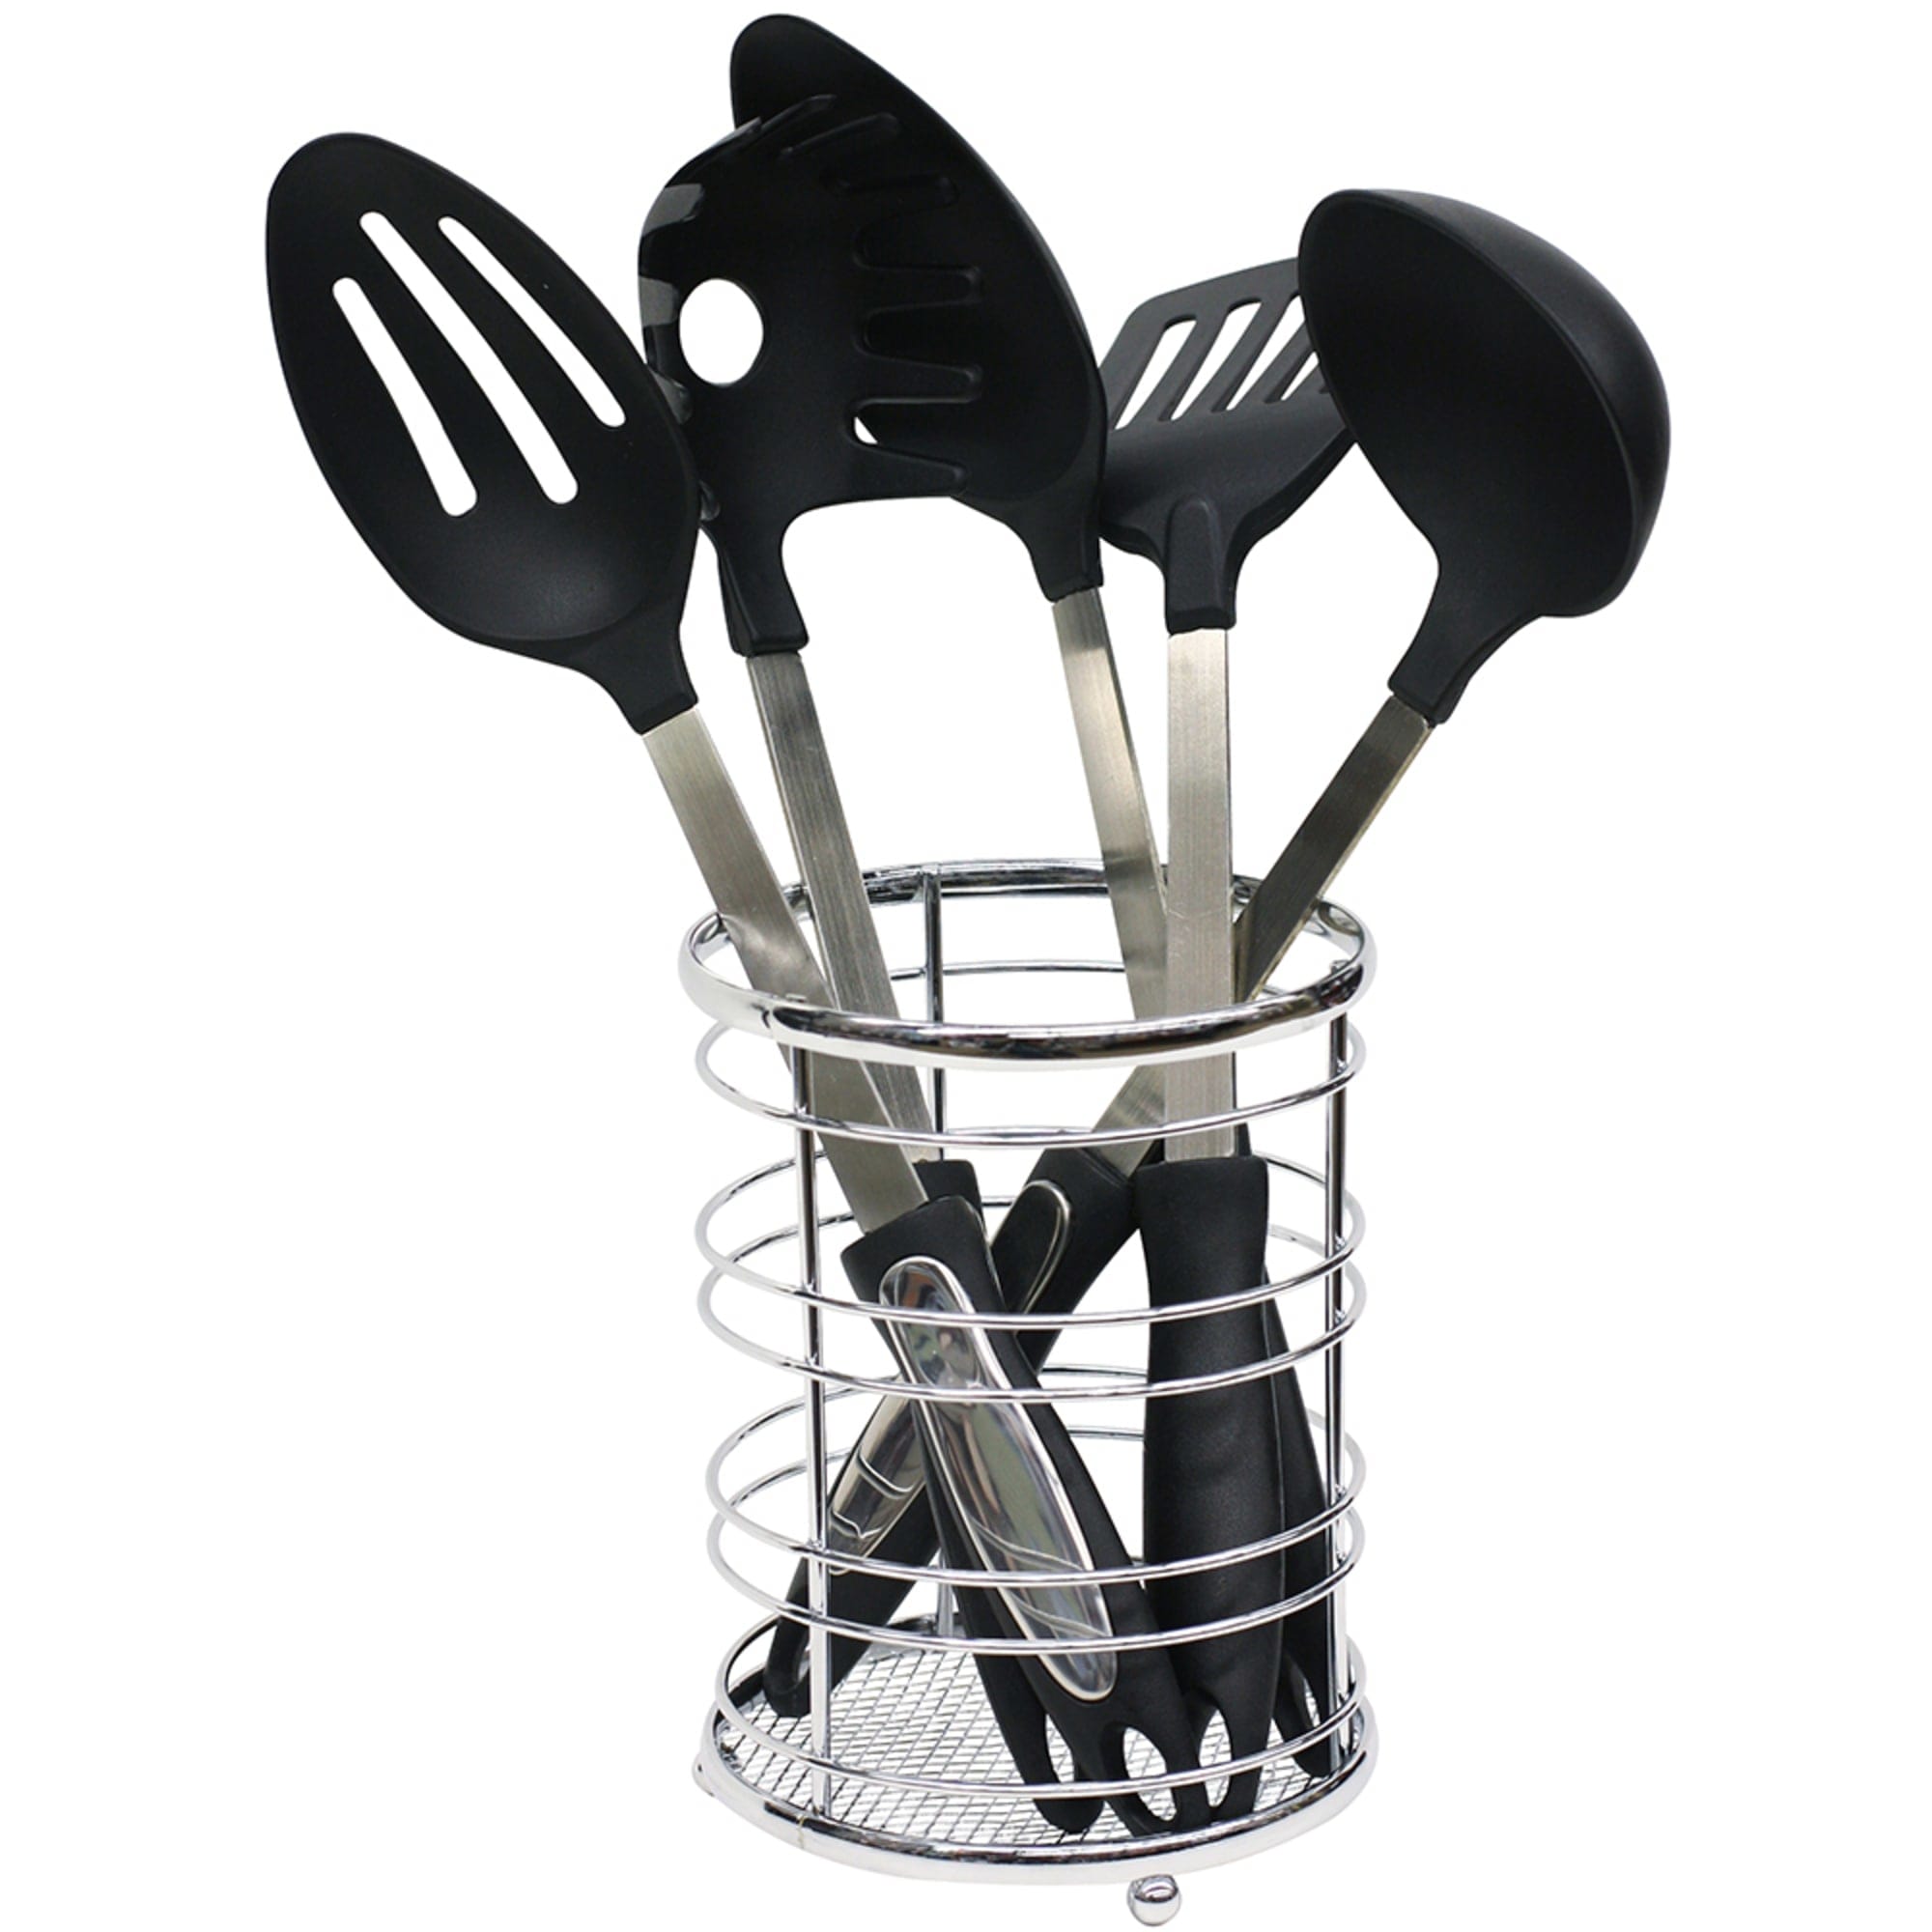 Home Basics Chrome Plated Steel Cutlery Holder $4.00 EACH, CASE PACK OF 24